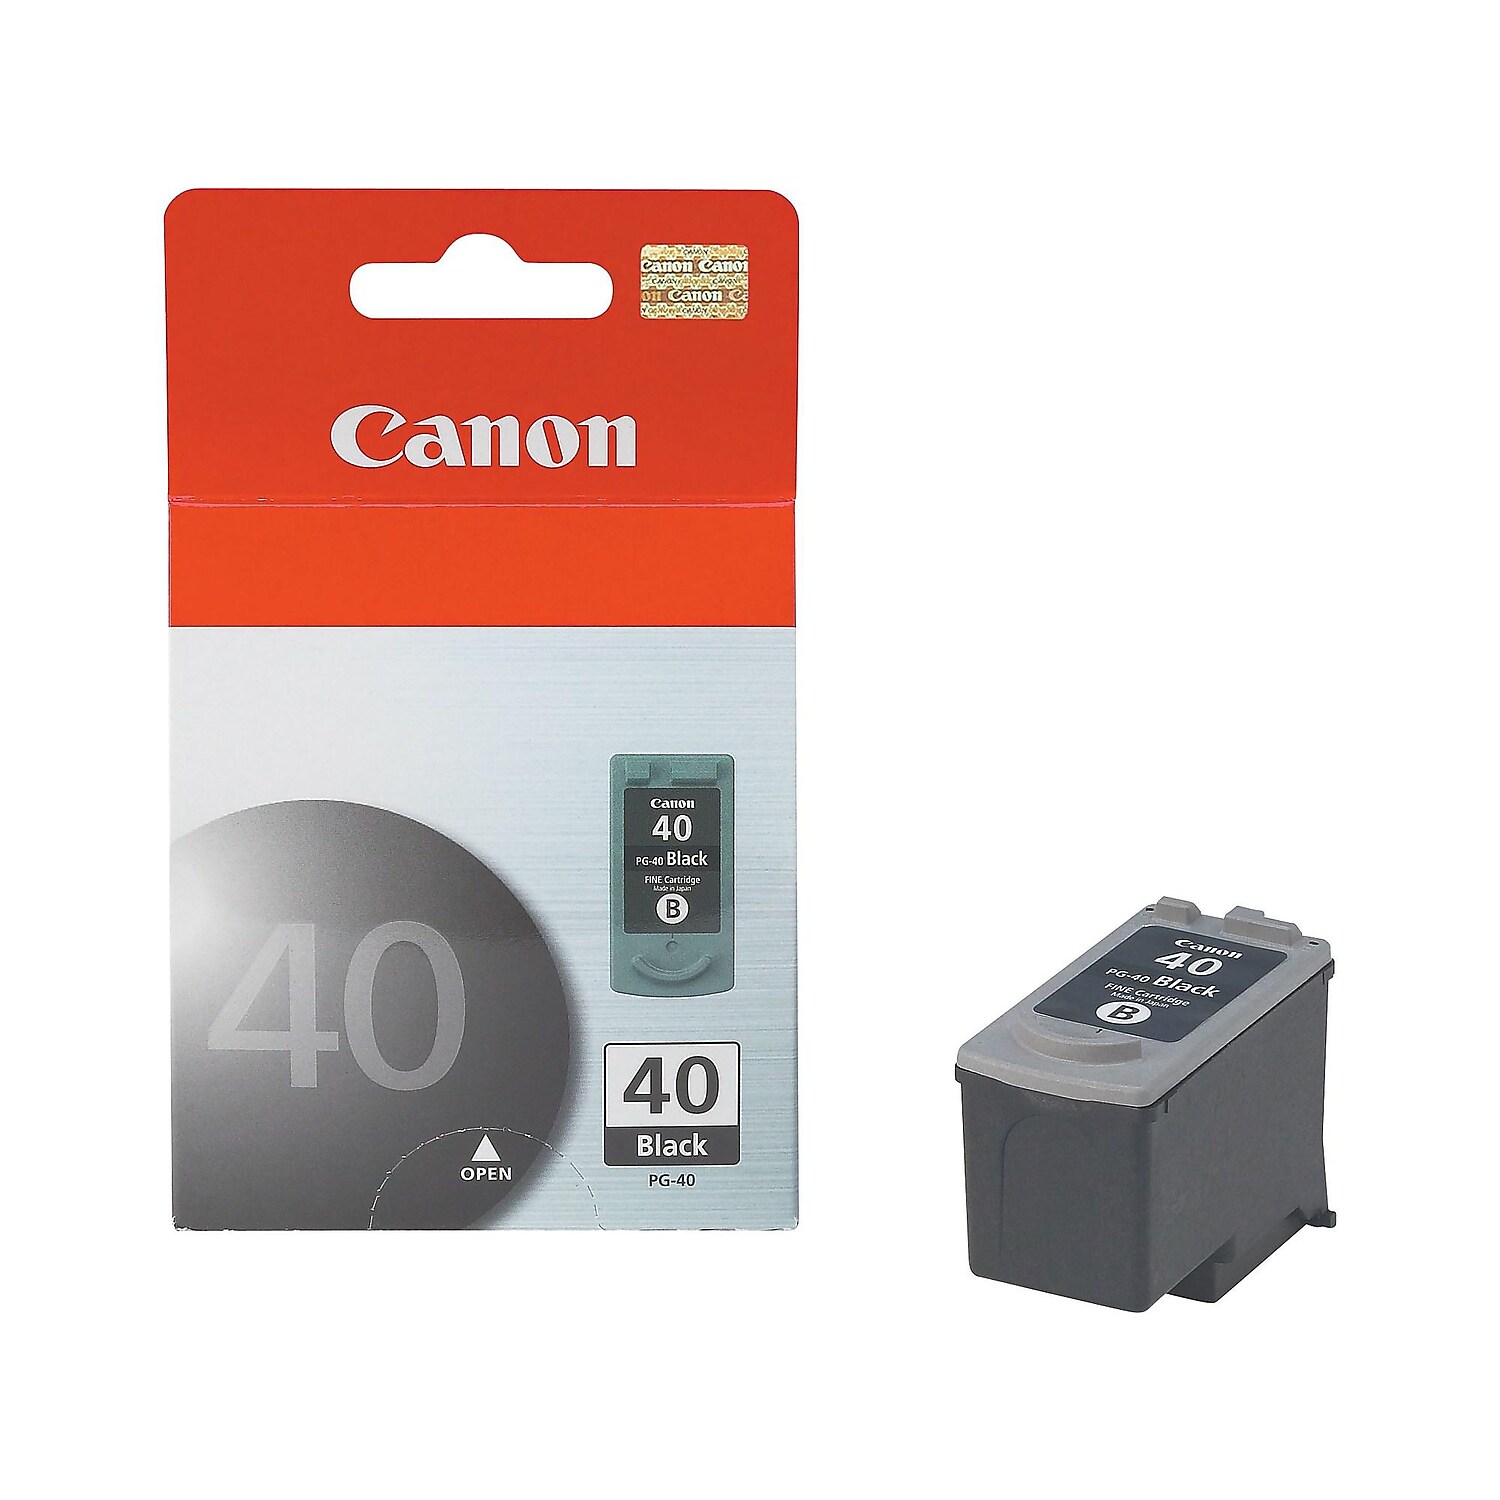 Canon PG-40 Ink Cartridge - image 1 of 5